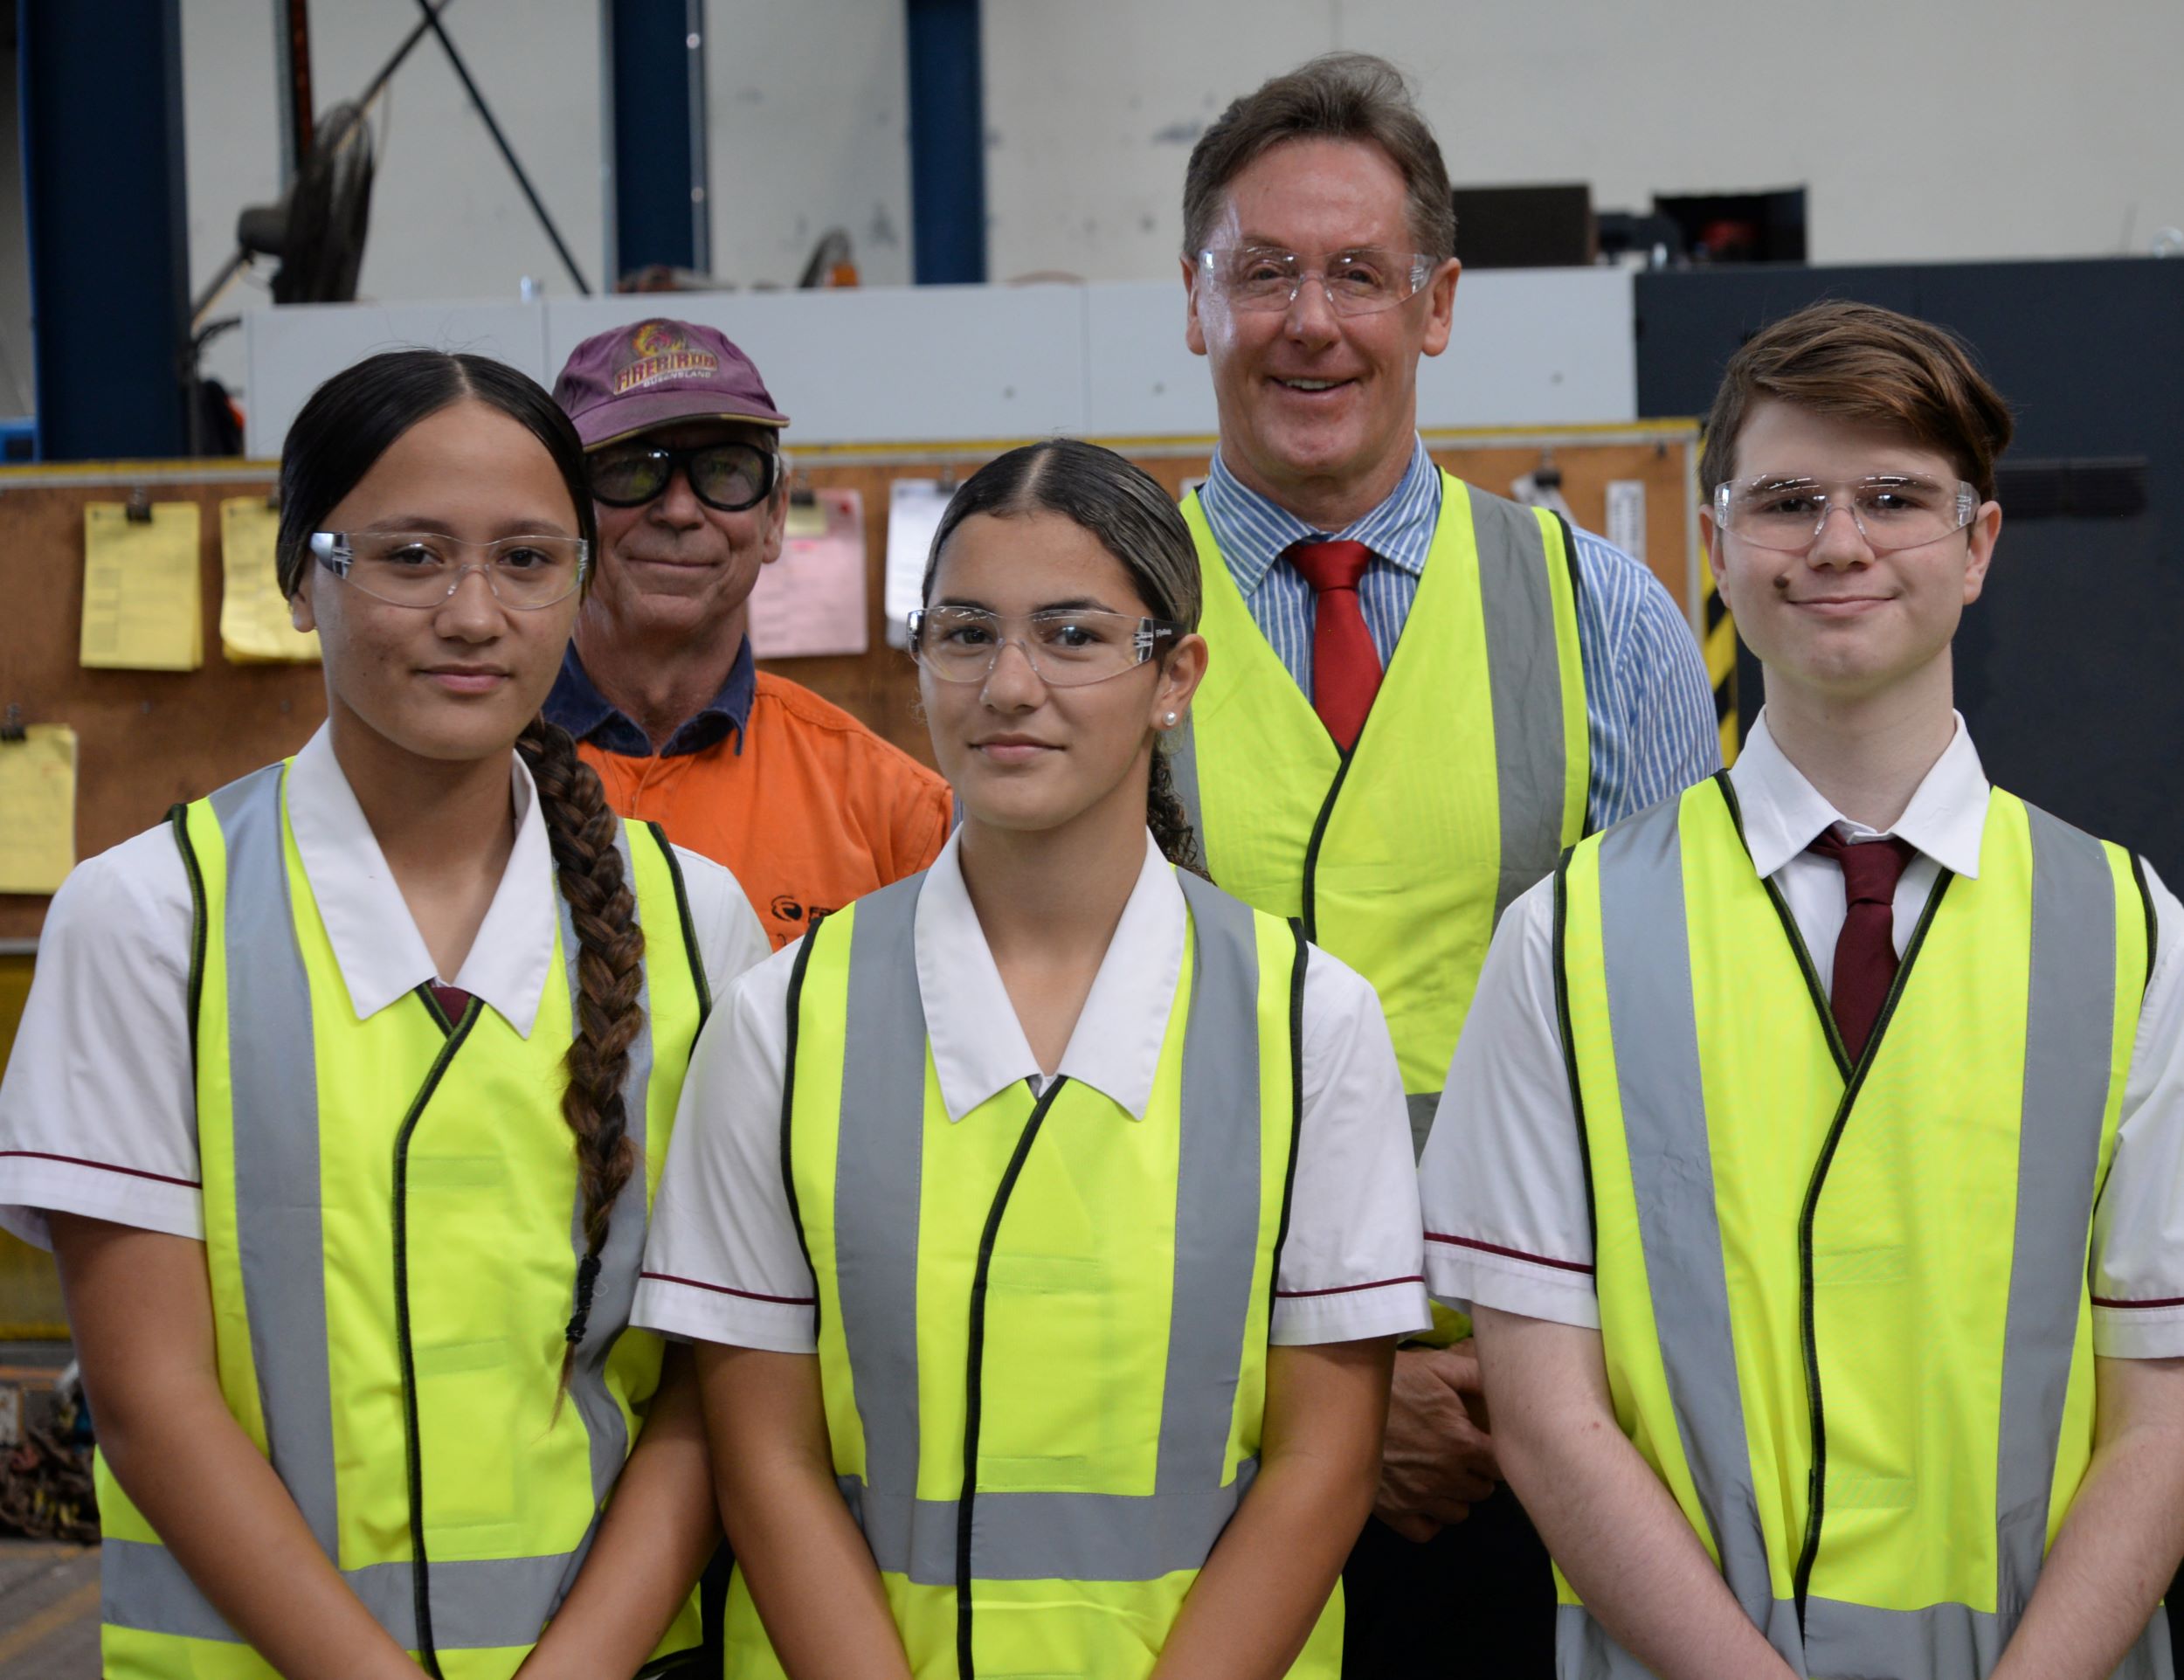 City of Logan Mayor Darren Power visits Frontline Manufacturing at Meadowbrook. He is with boilermaker Tony Loibl (left) and Marsden State High School students Nikola Macdonald, Cerese Amaru and Cody Ceder.